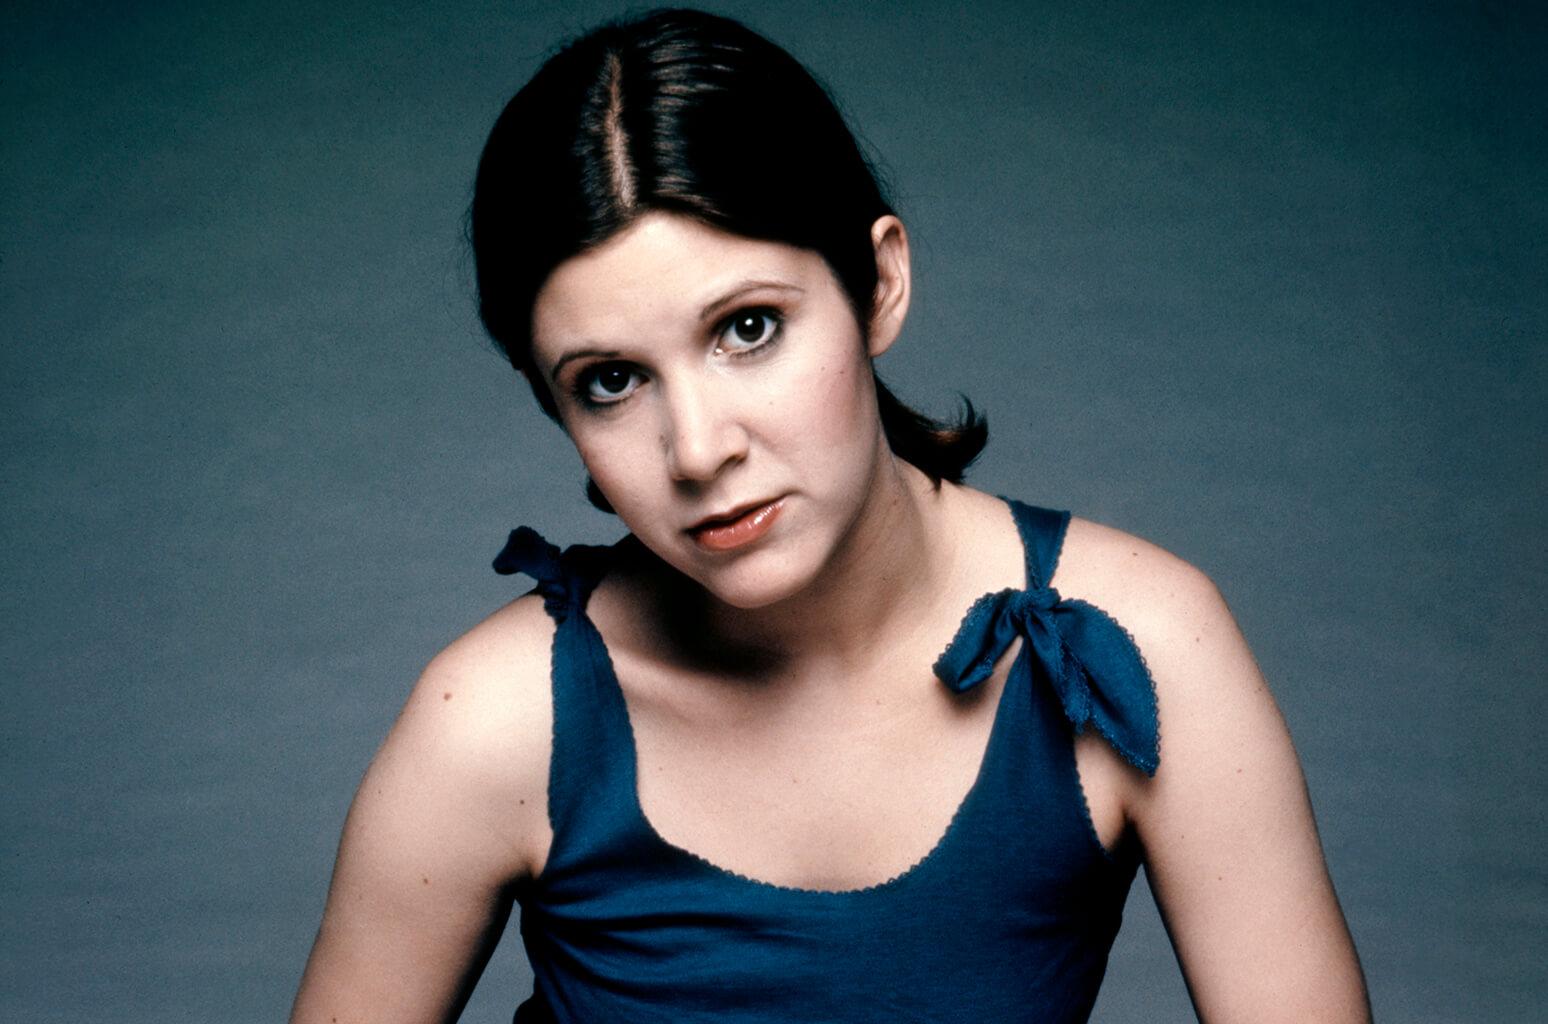 Hot Pictures Of Carrie Fisher Will Drive You Nuts For Her The Viraler